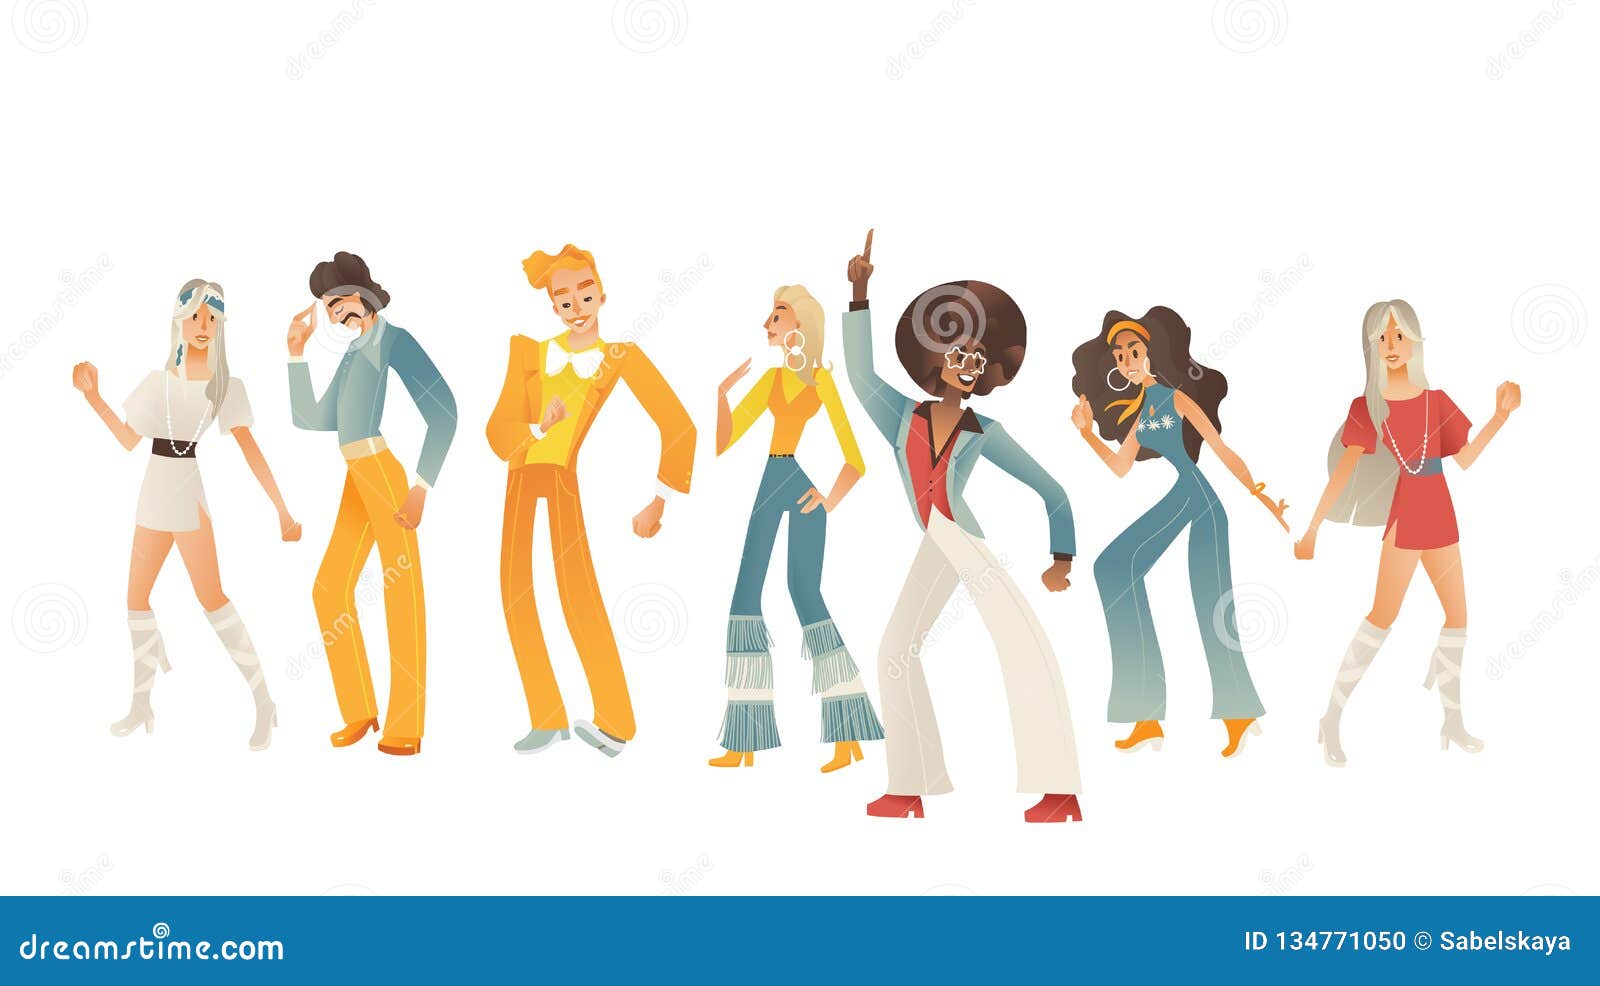 Disco Dancing People Vector Illustration Set With Various Men And